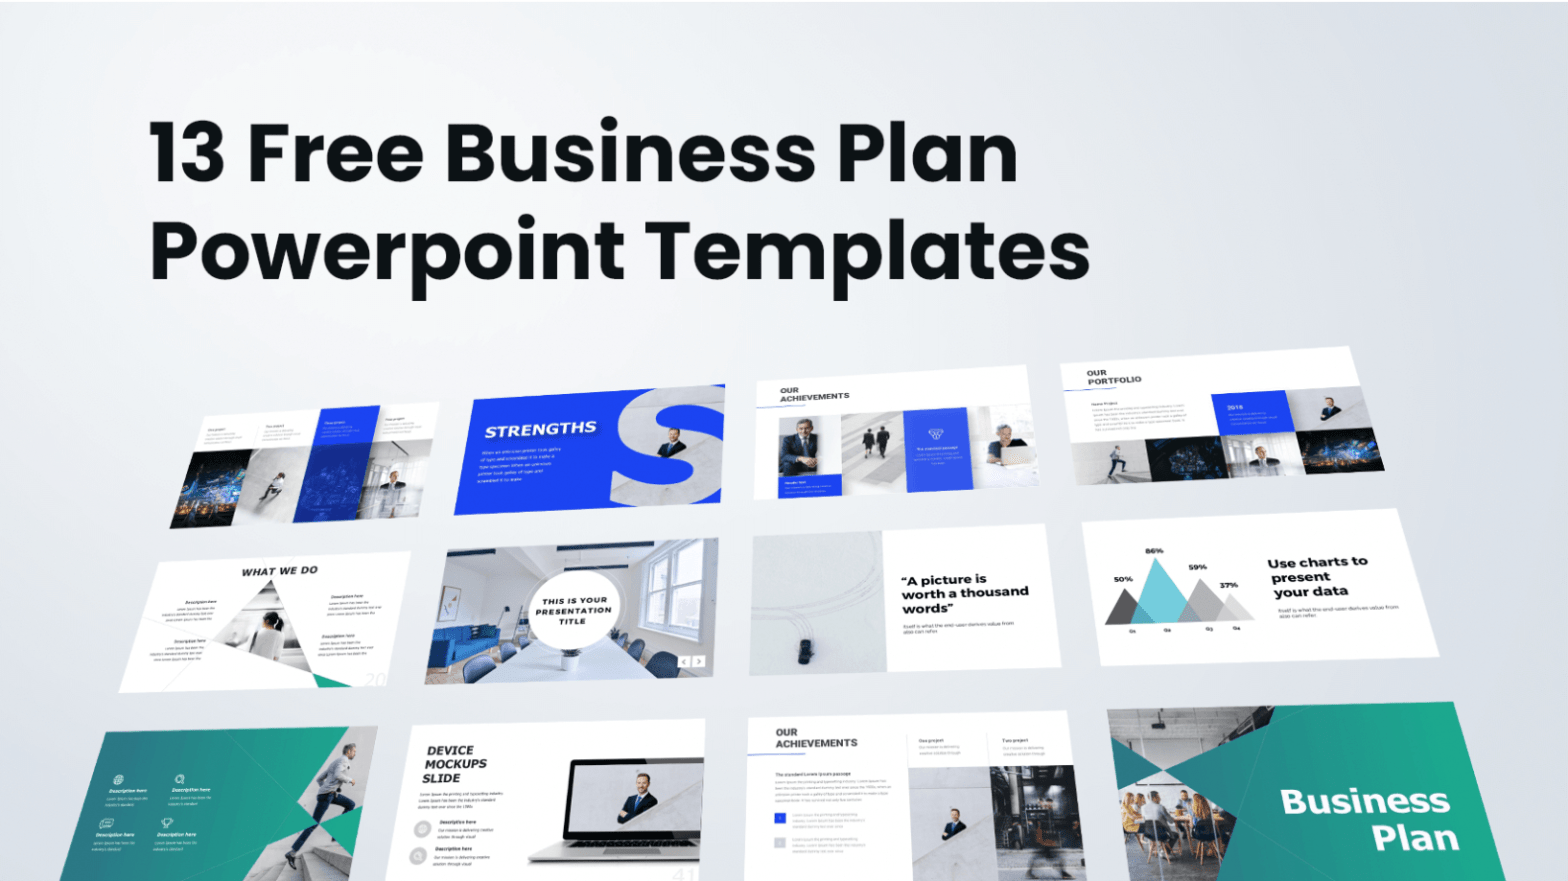 13 Free Business Plan Powerpoint Templates To Get Now intended for Business Plan Presentation Template Ppt